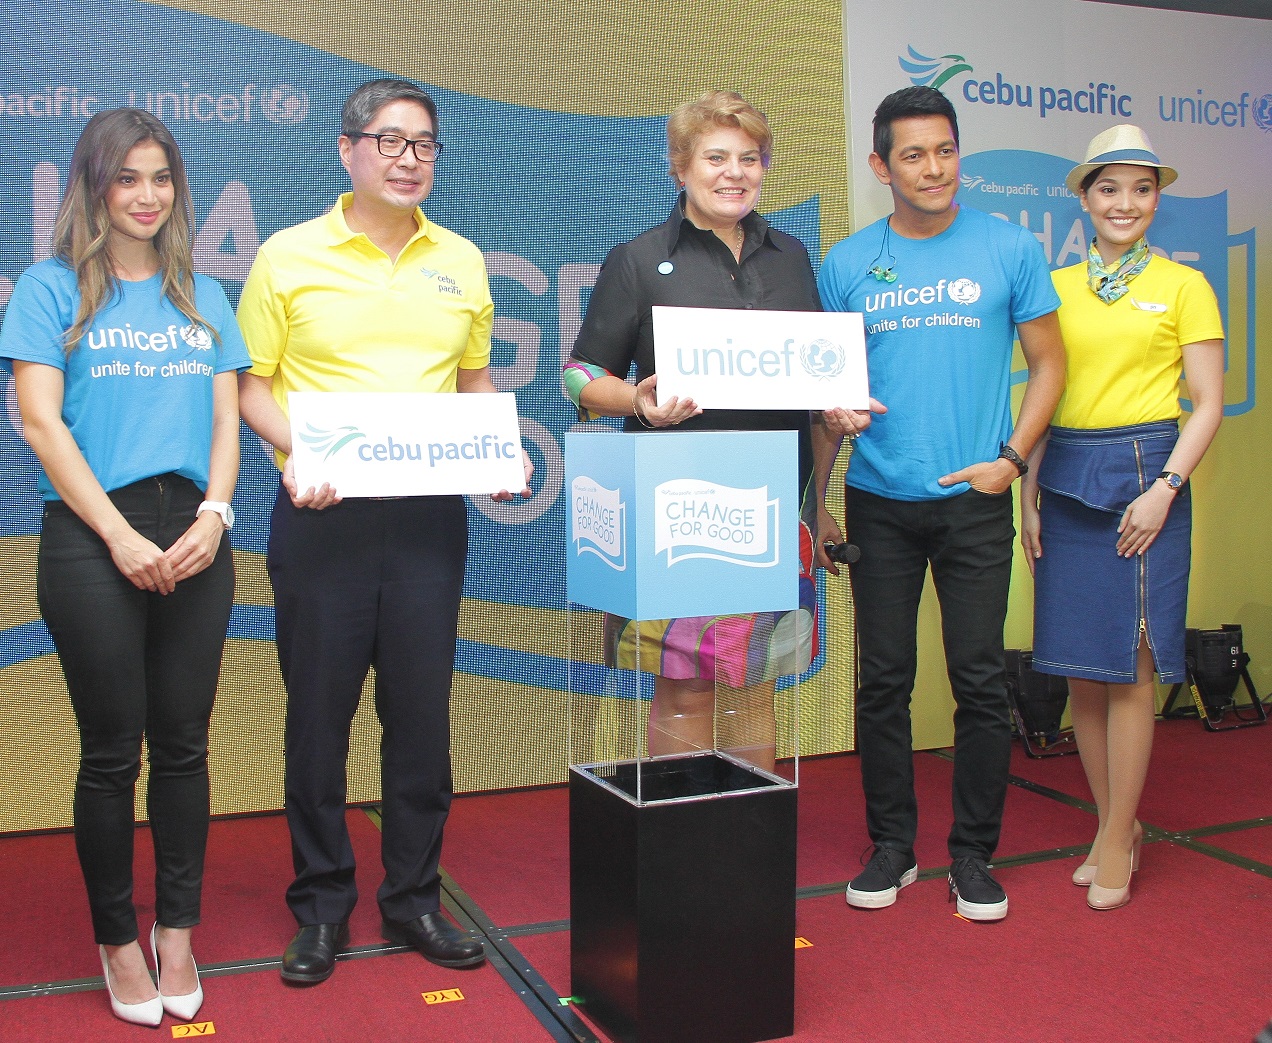 Cebu Pacific and UNICEF partner to launch Change for Good program to bring health and nutrition to infants and young children in the Philippines